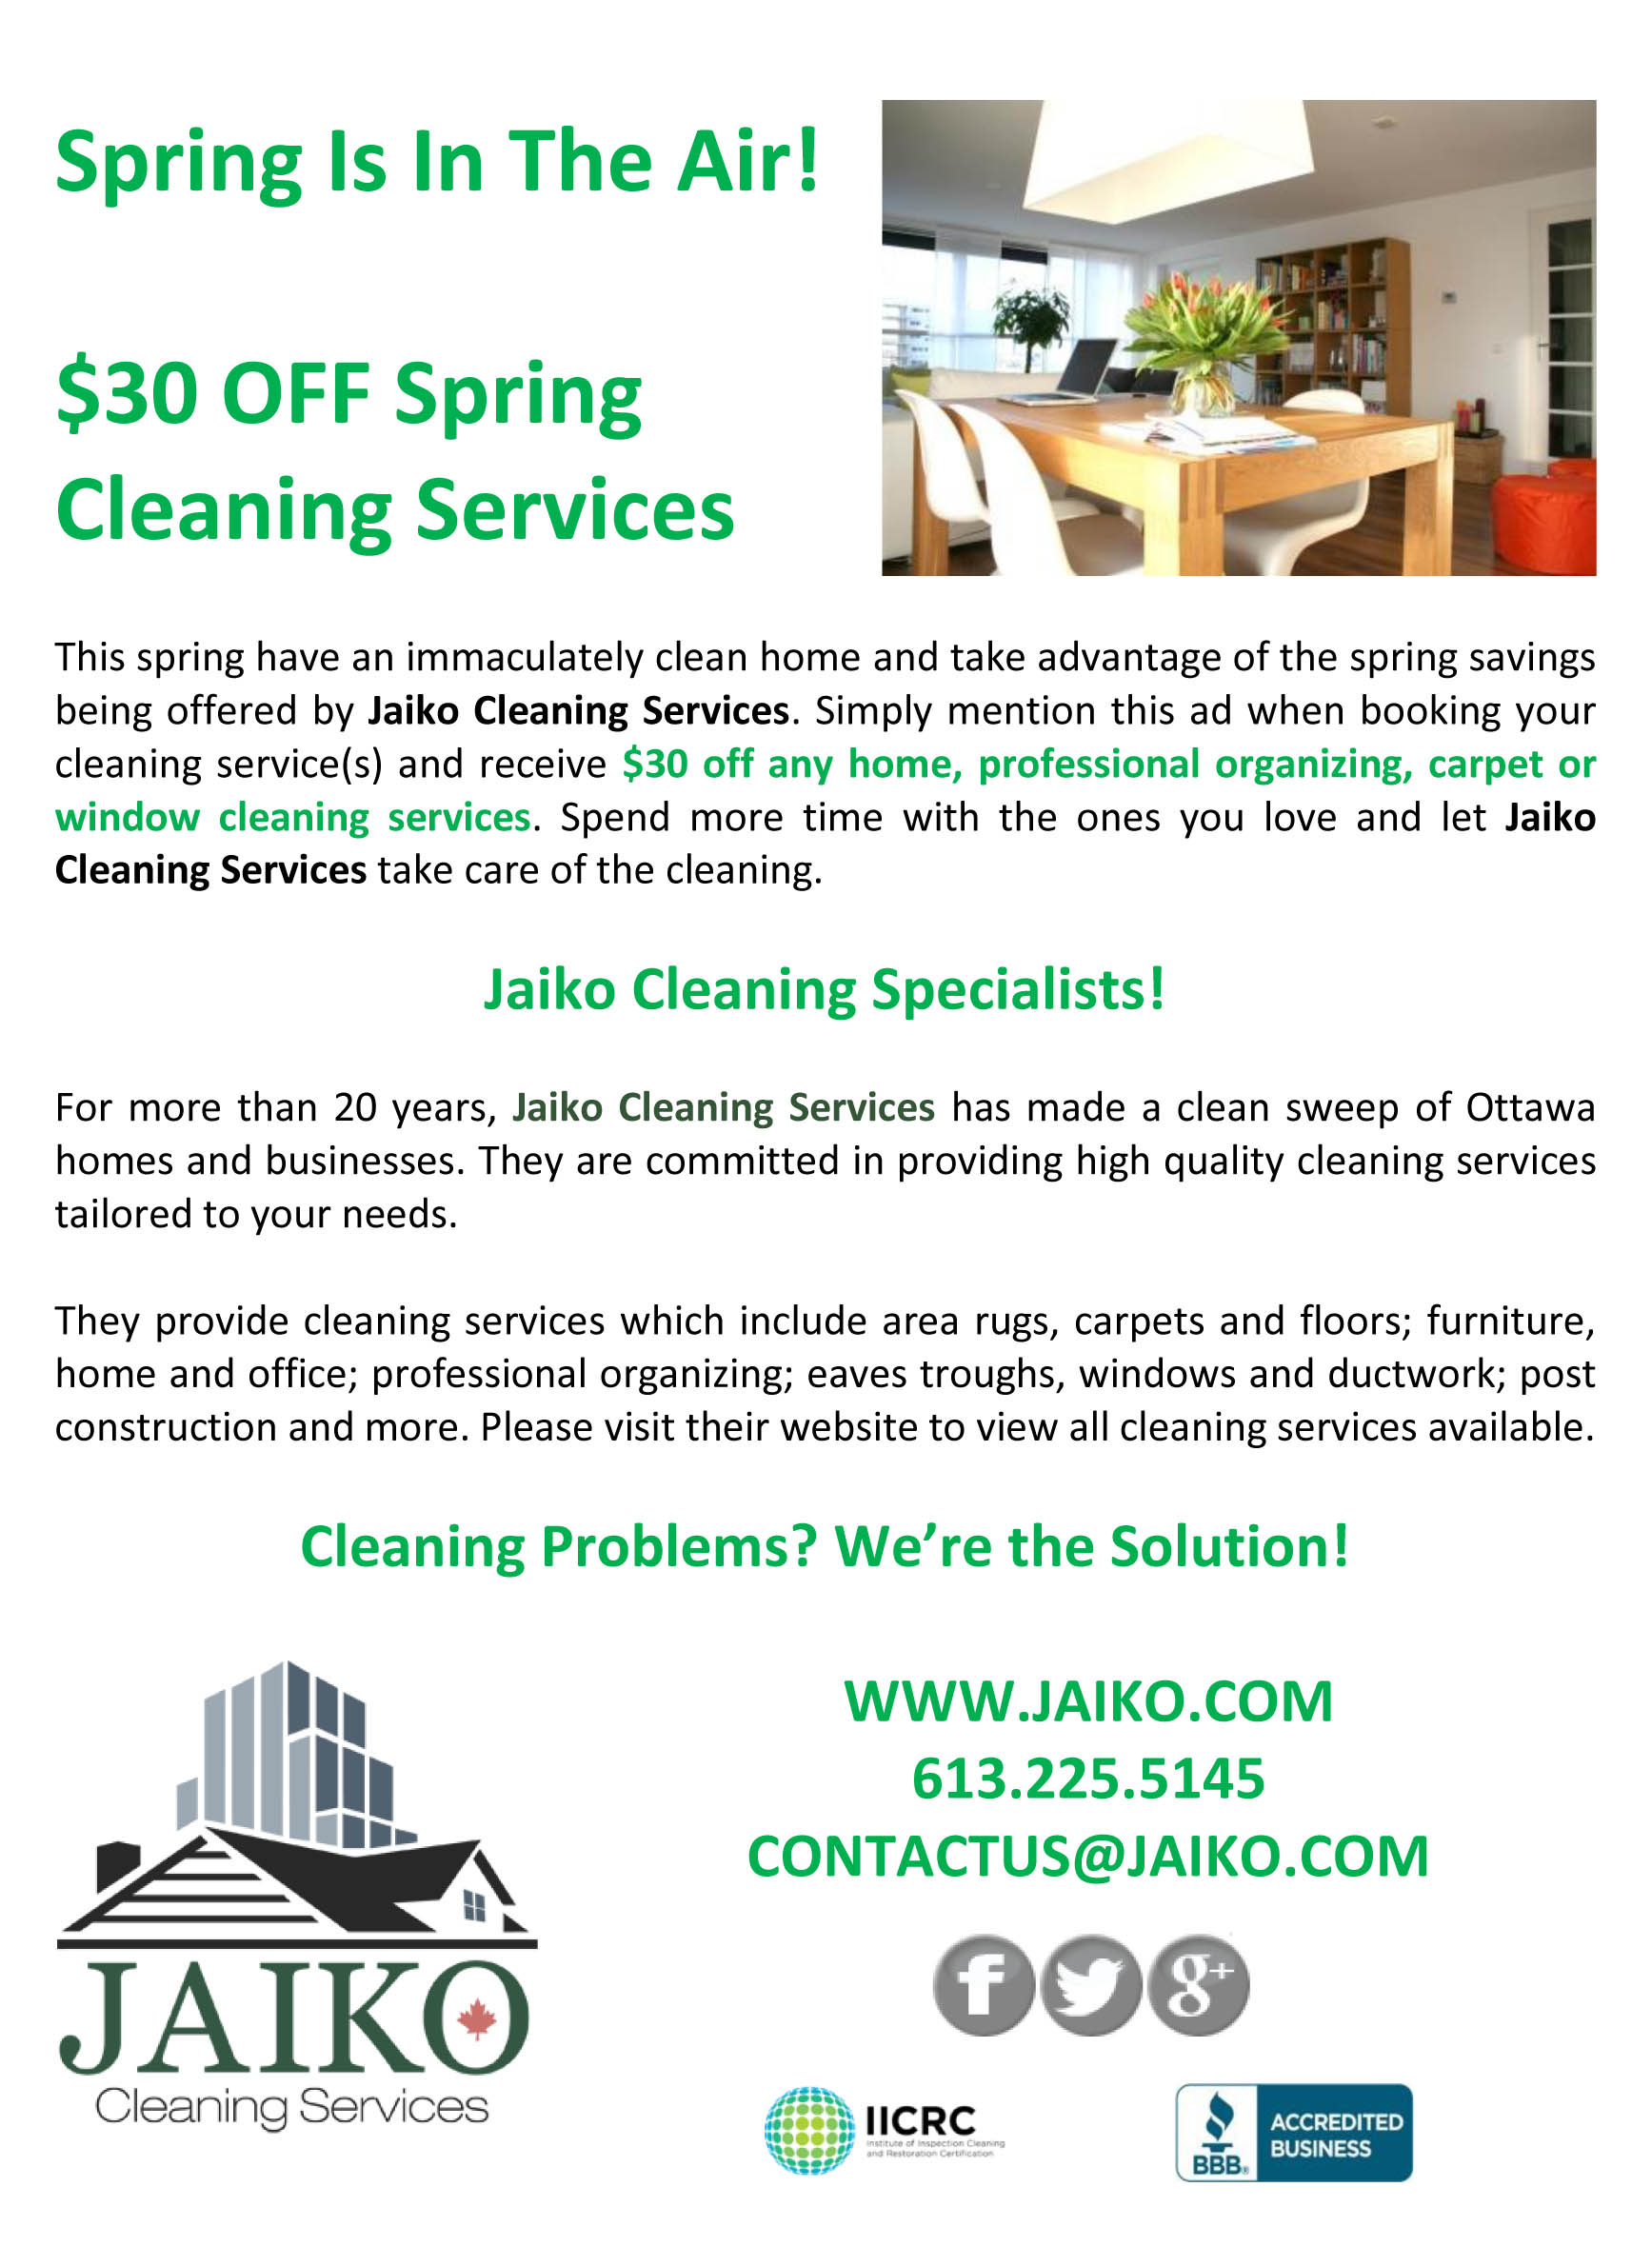 Spring cleaning special $30 OFF home, professional organizing, carpet or window cleaning services.